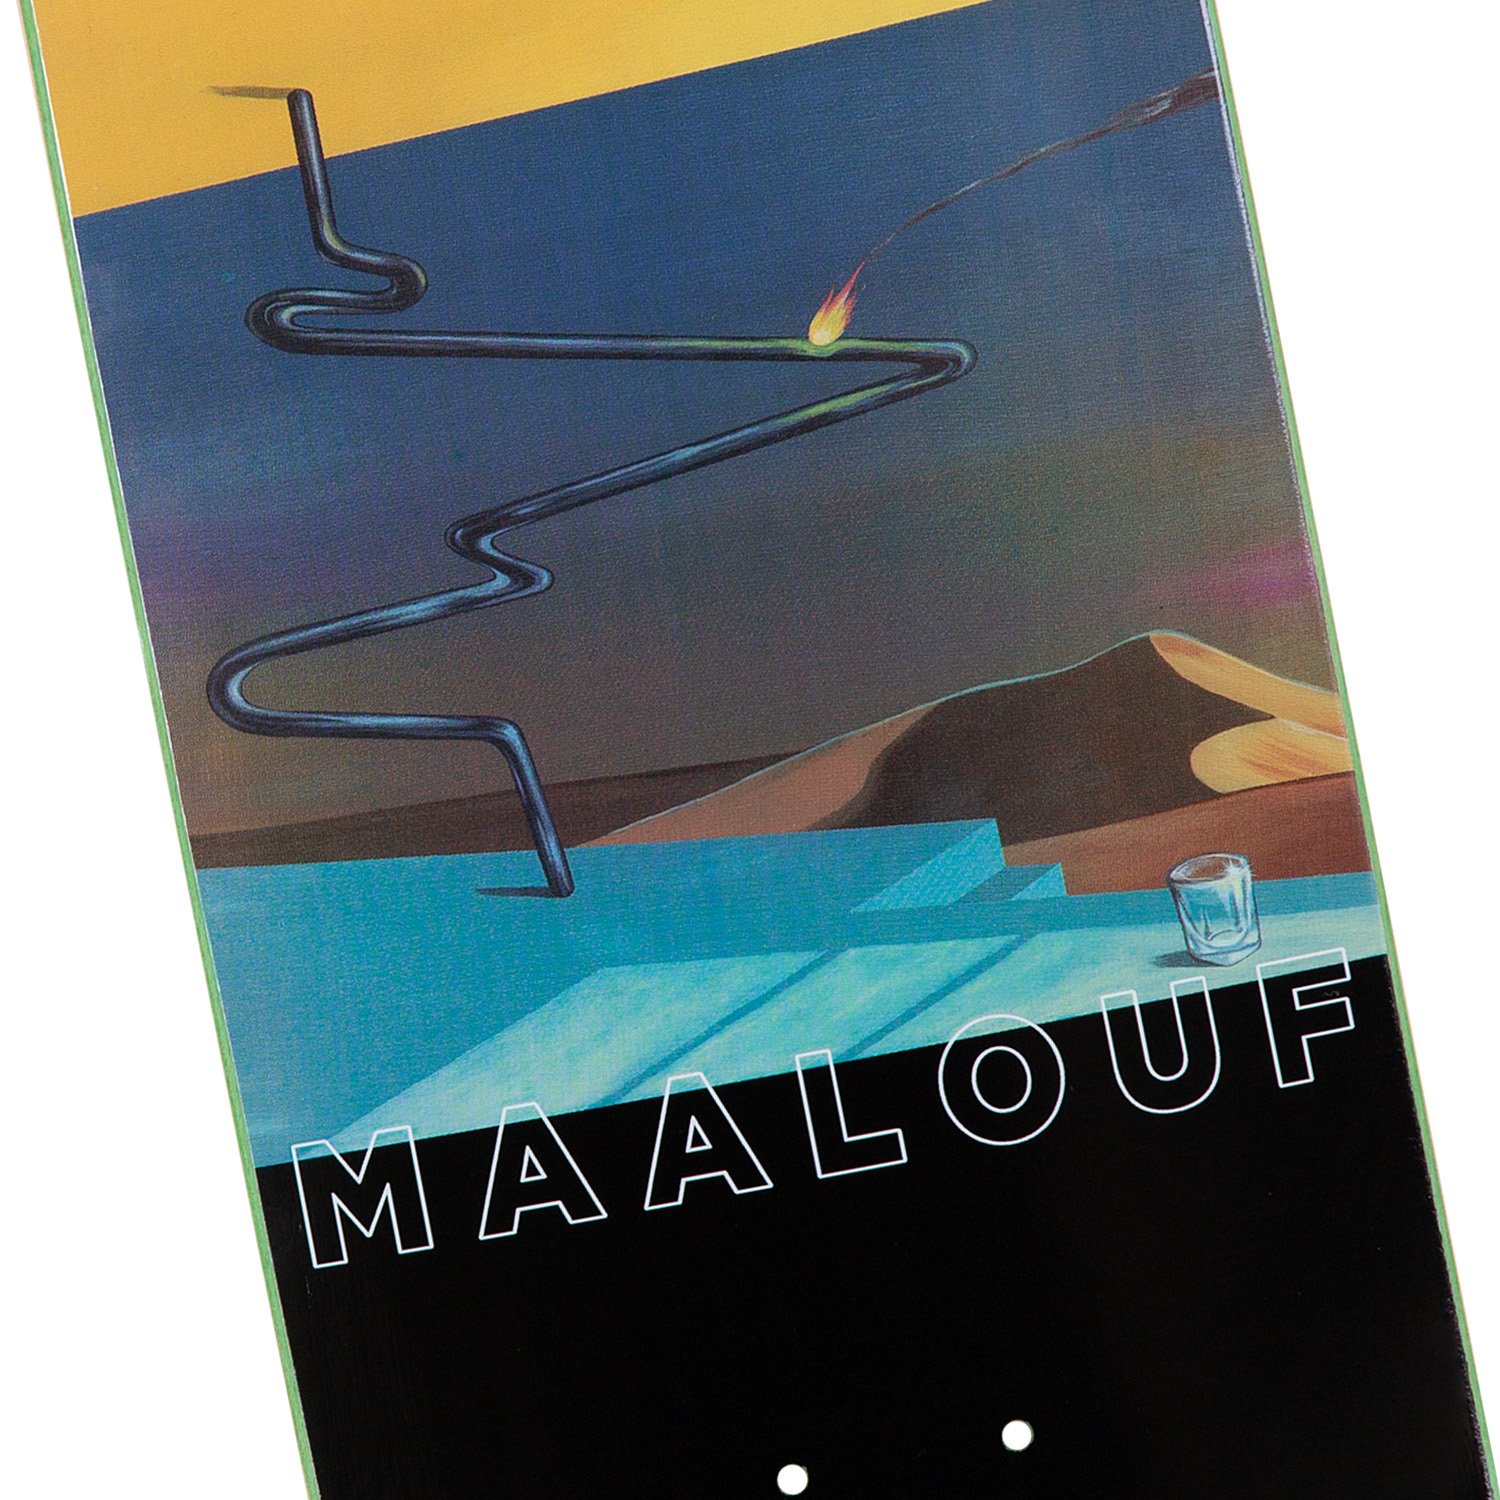 WKND Skateboards "Fire in the Pipe" Christian Maalouf Deck 02